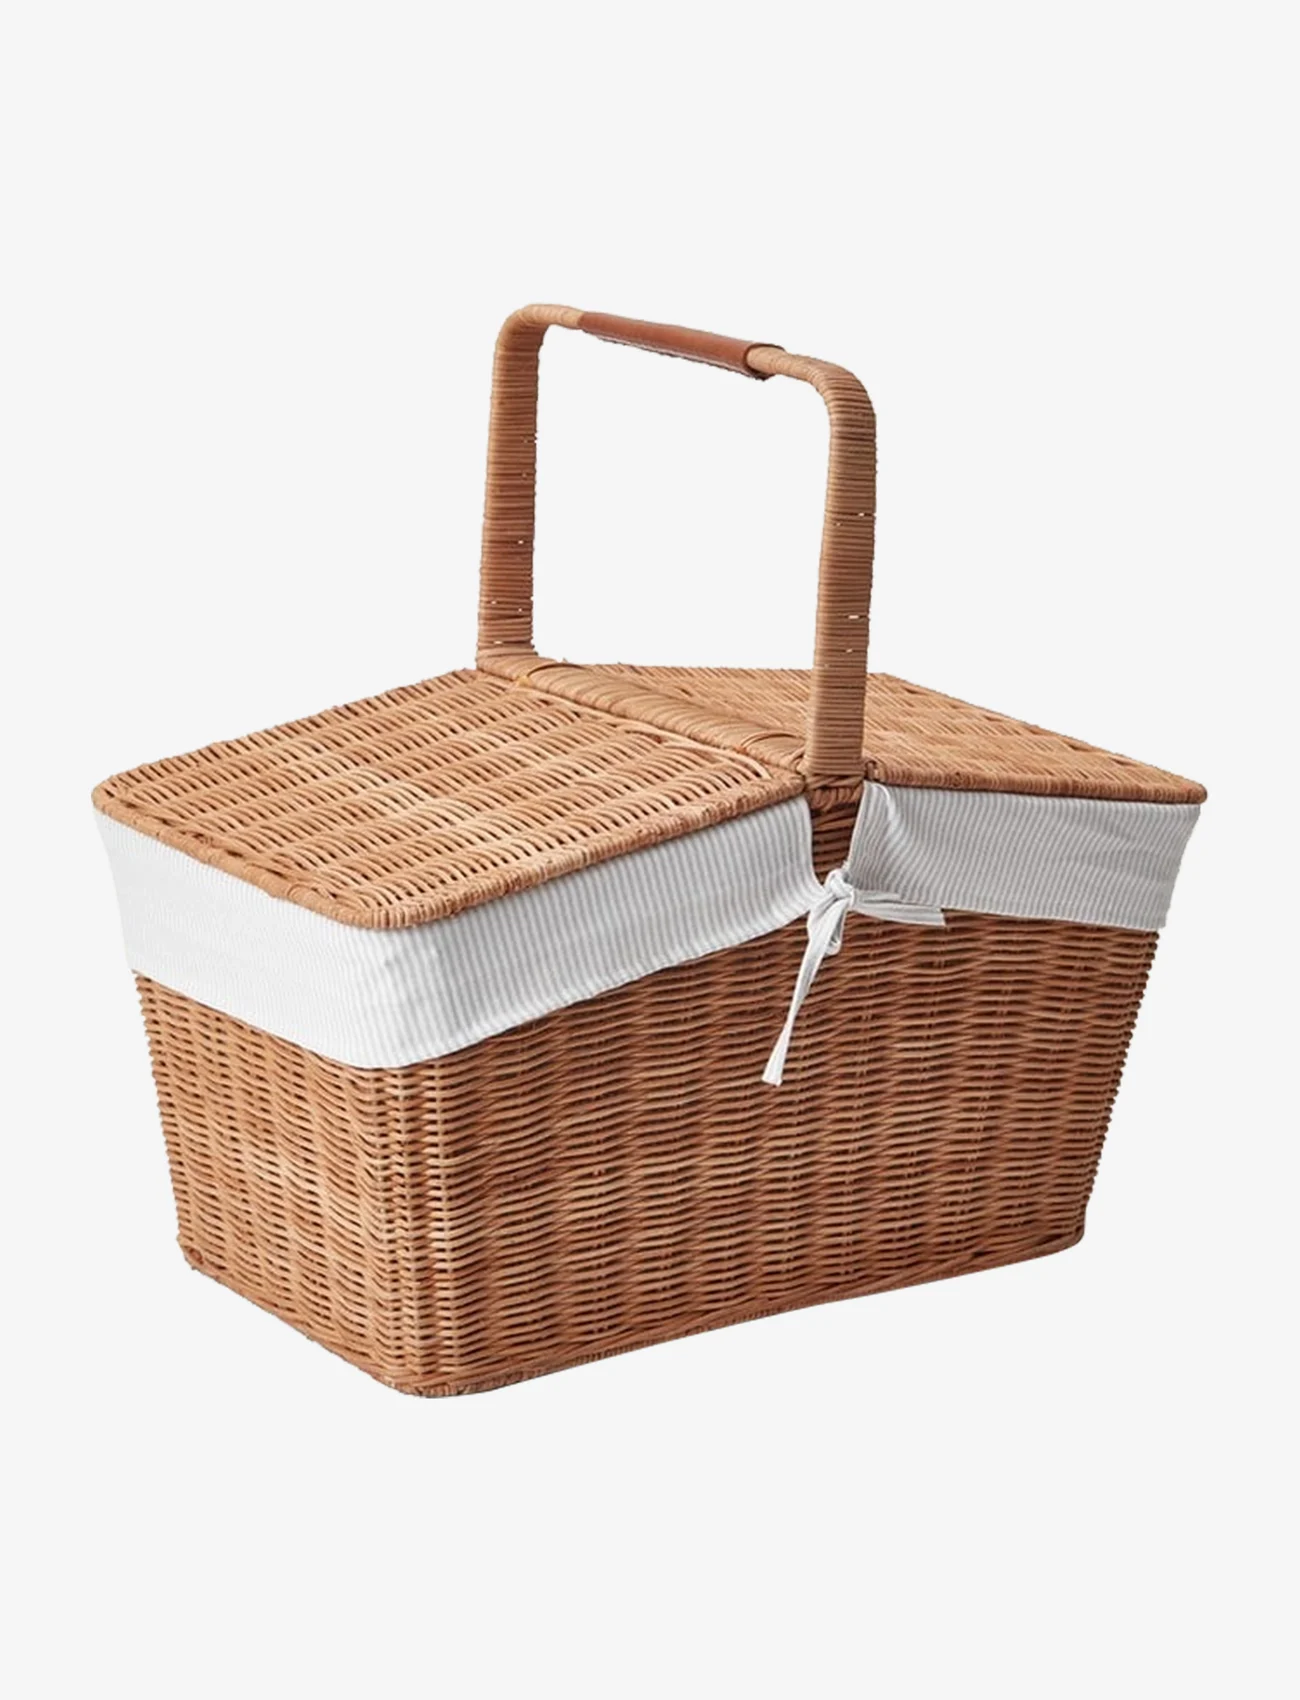 Lexington Home - Rattan Picnic Basket with Leather and Liner - natural - 0